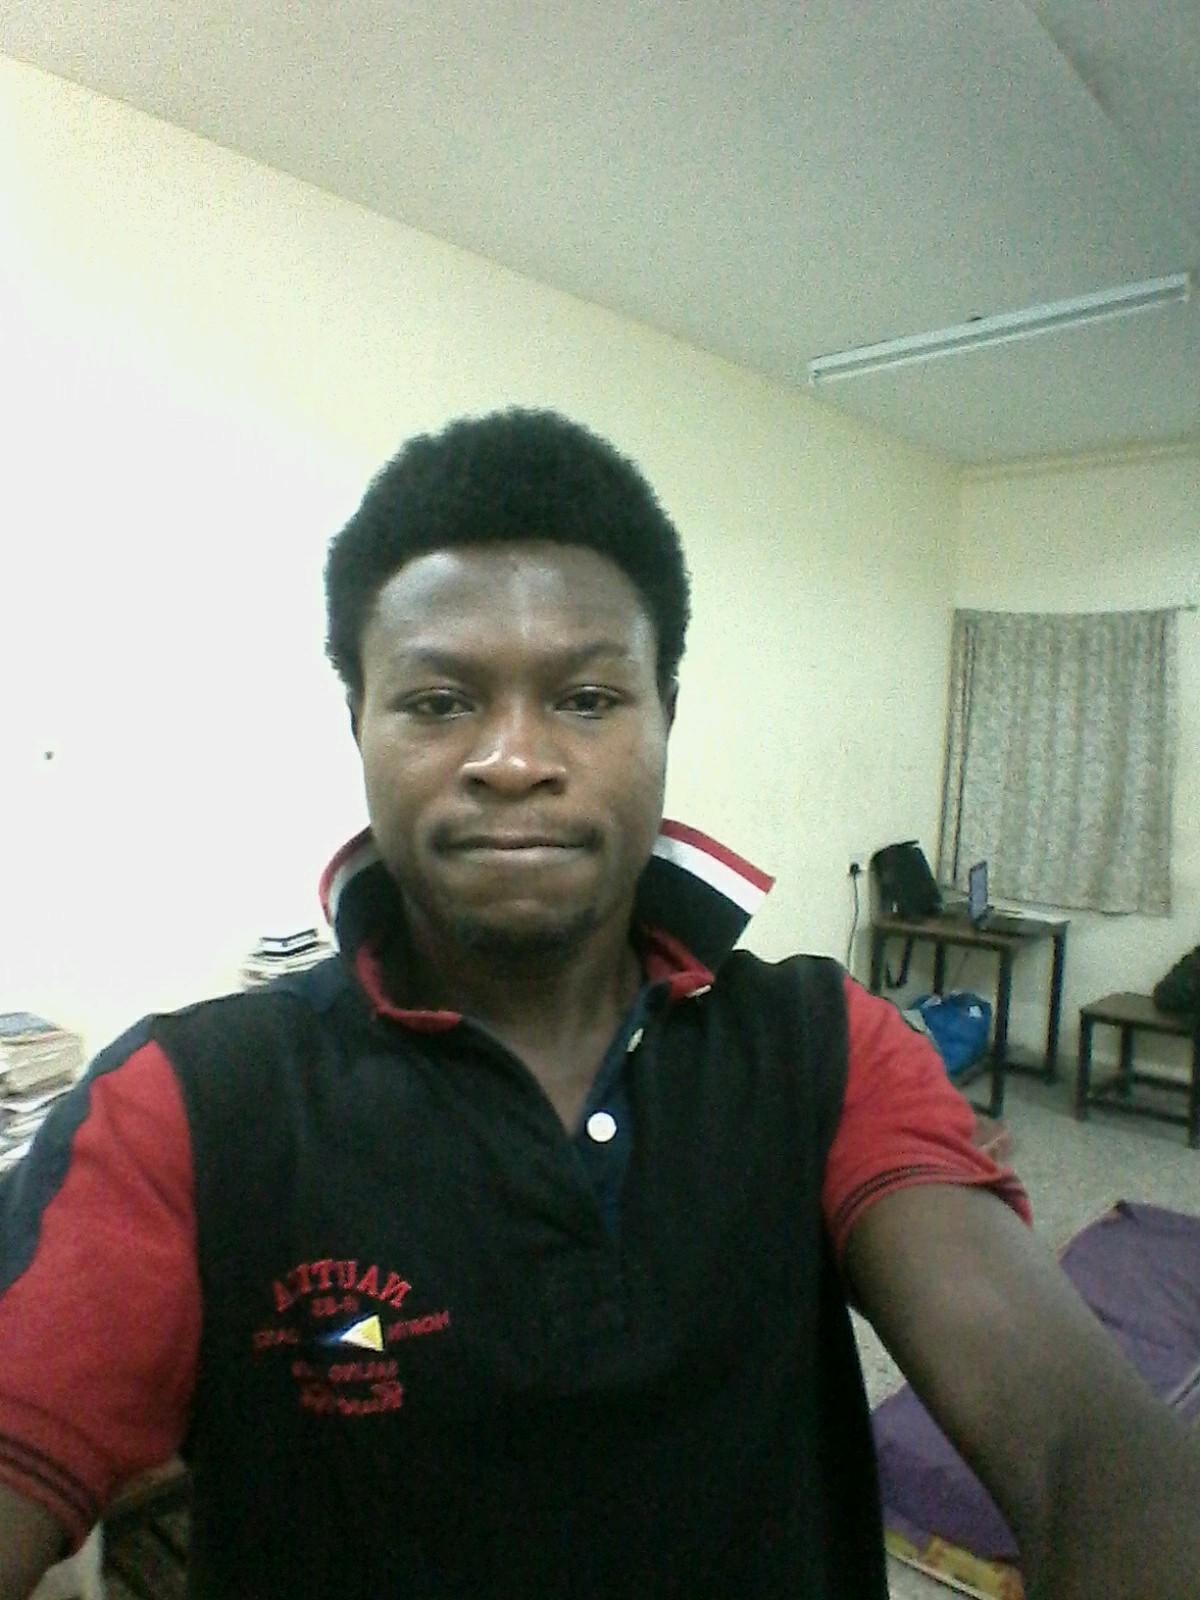 My name is Valentino Davies Ajewole, I love meeting people and making new friends